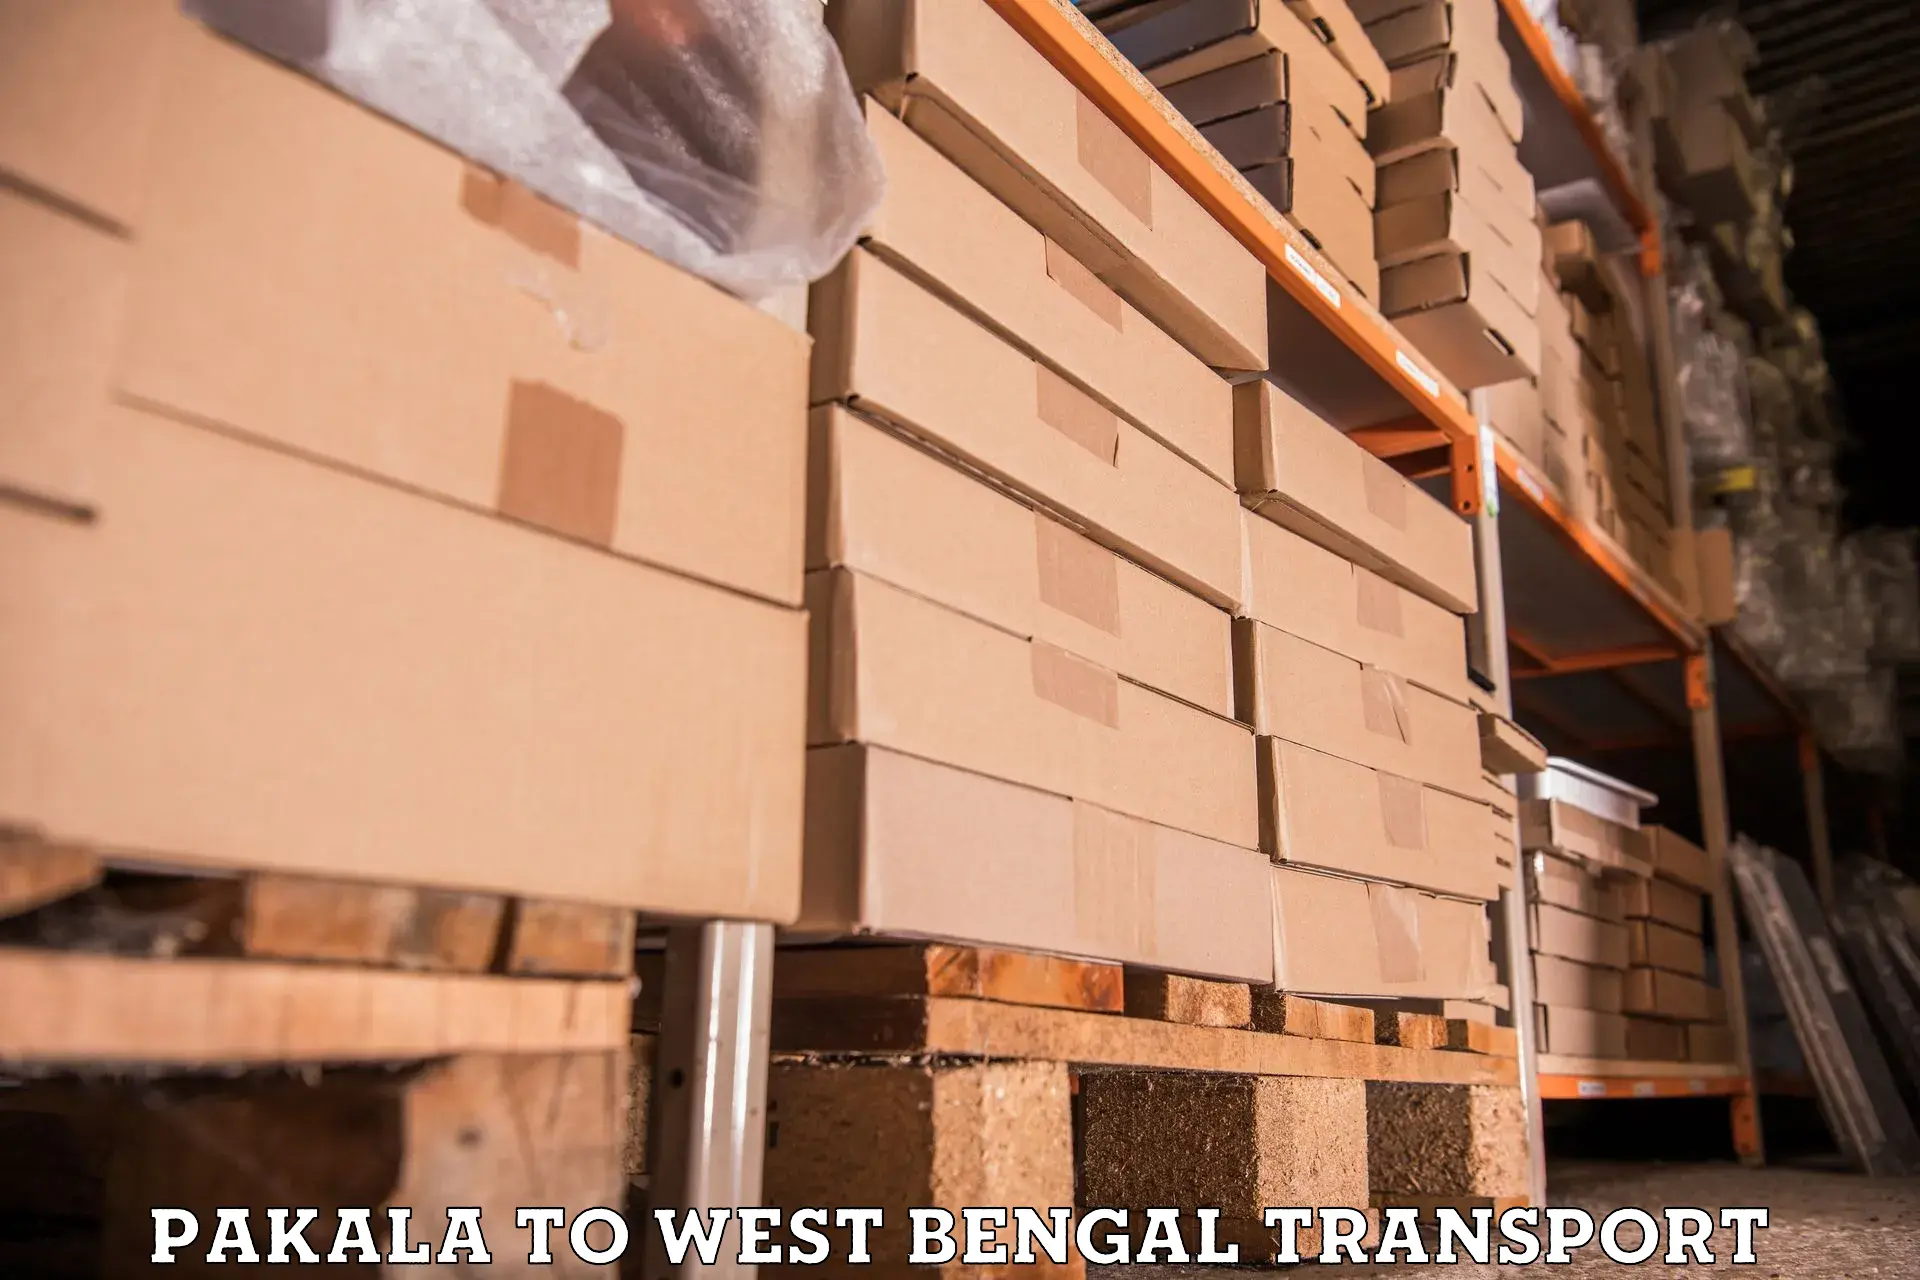 Nearby transport service Pakala to West Bengal